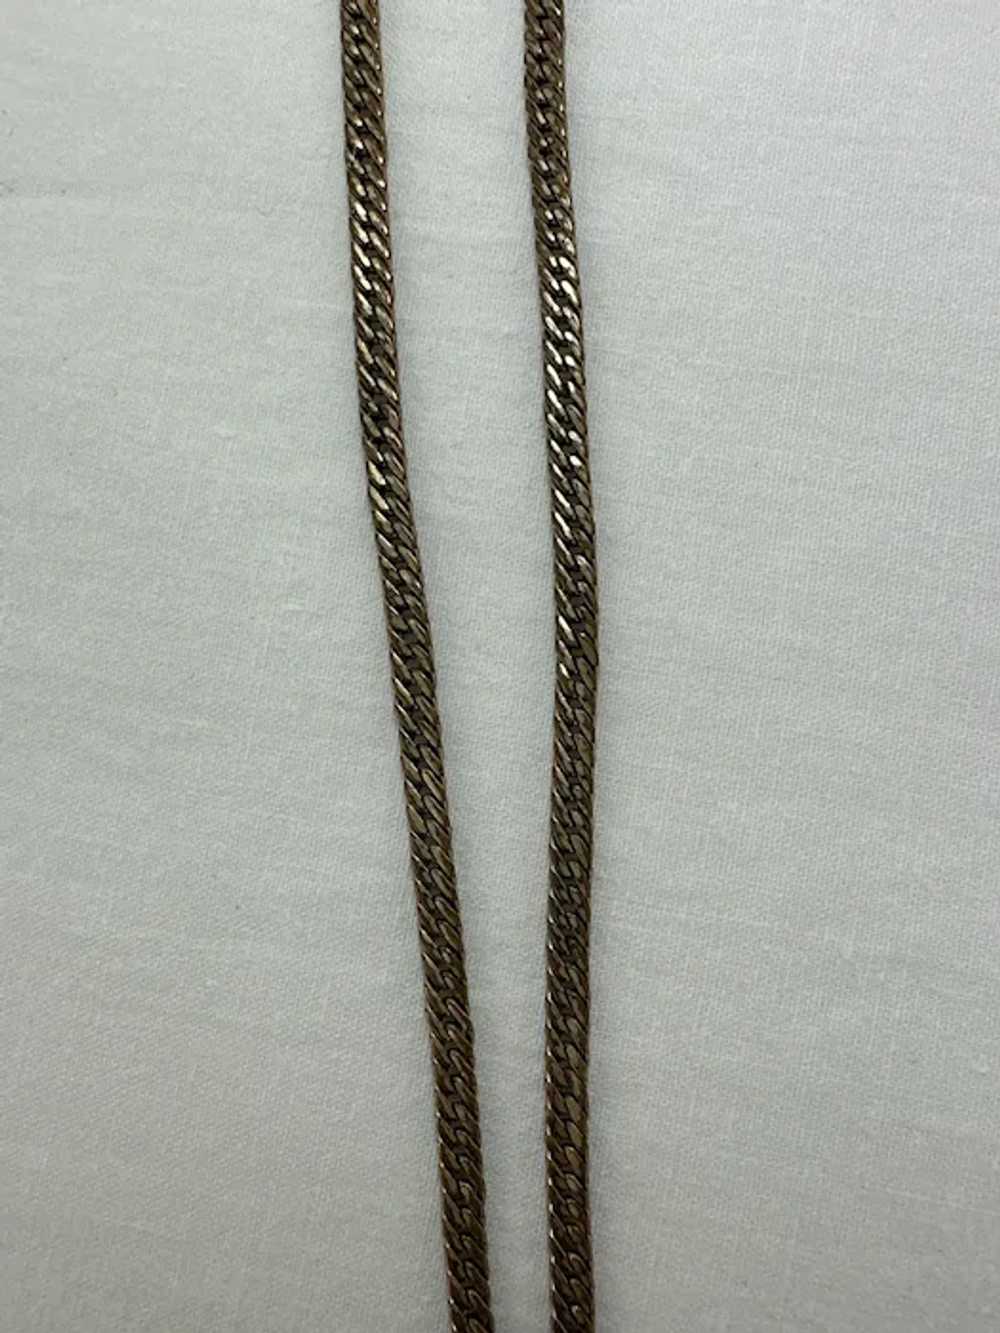 Victorian Double Chain Slide Watch Chain - image 5